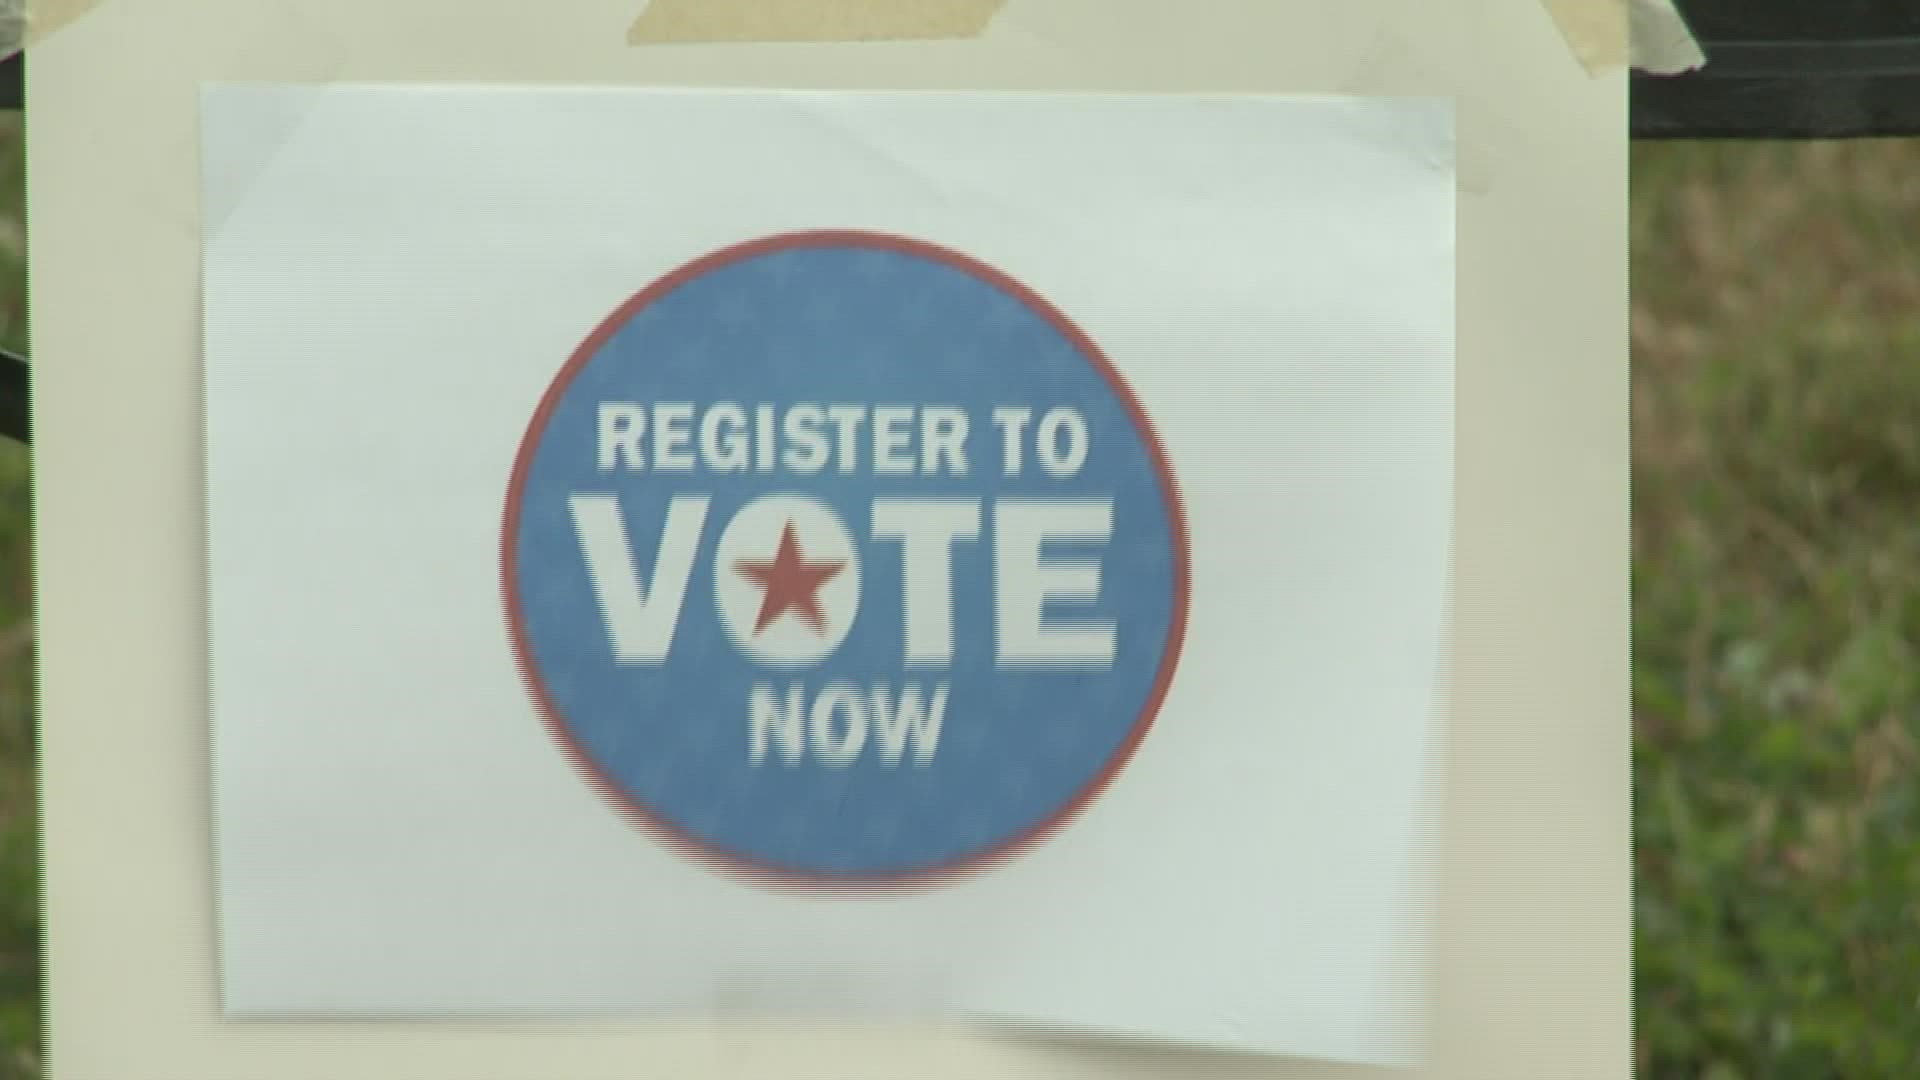 The midterm elections are just around the corner — are you registered to vote? Iowa launched a website to help those struggling with opioid addiction.